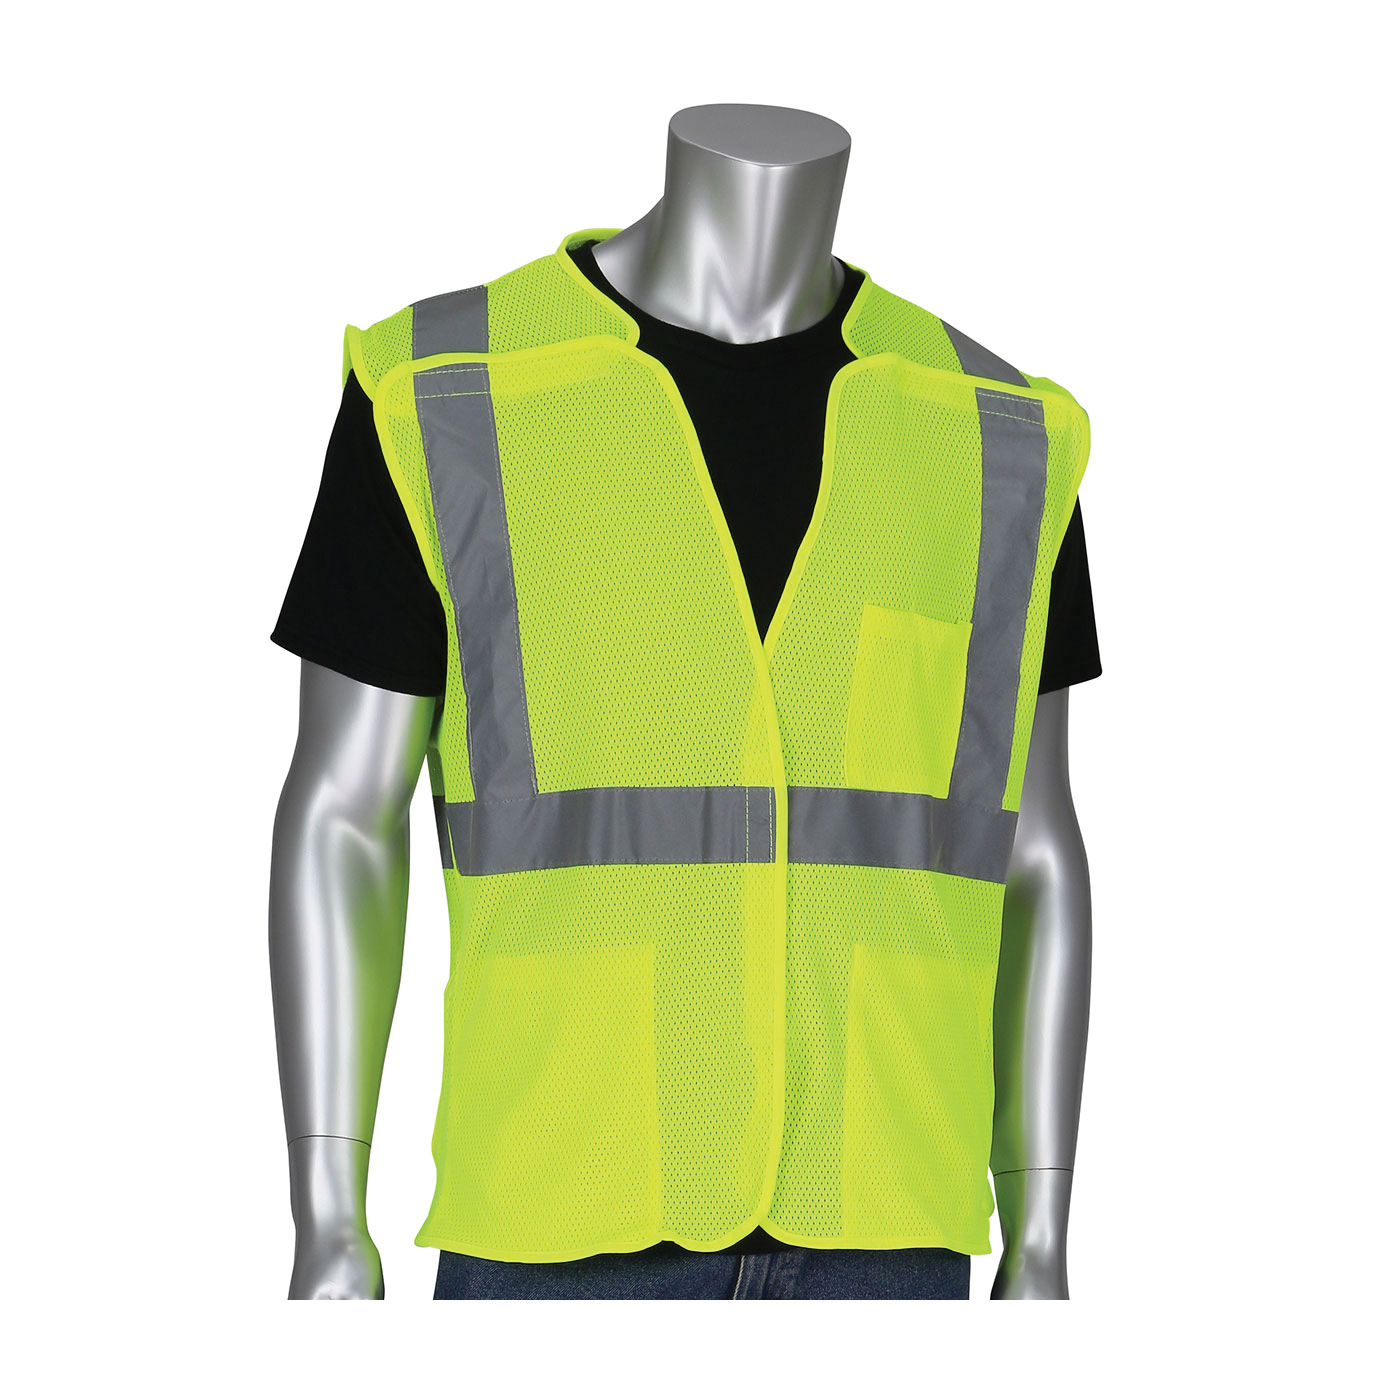 PIP® 302-5PMVLY-M Safety Vest, M, Hi-Viz Lime Yellow, Polyester, Hook and Loop Closure, 3 Pockets, ANSI Class: Class 2, Specifications Met: ANSI 107 Type R